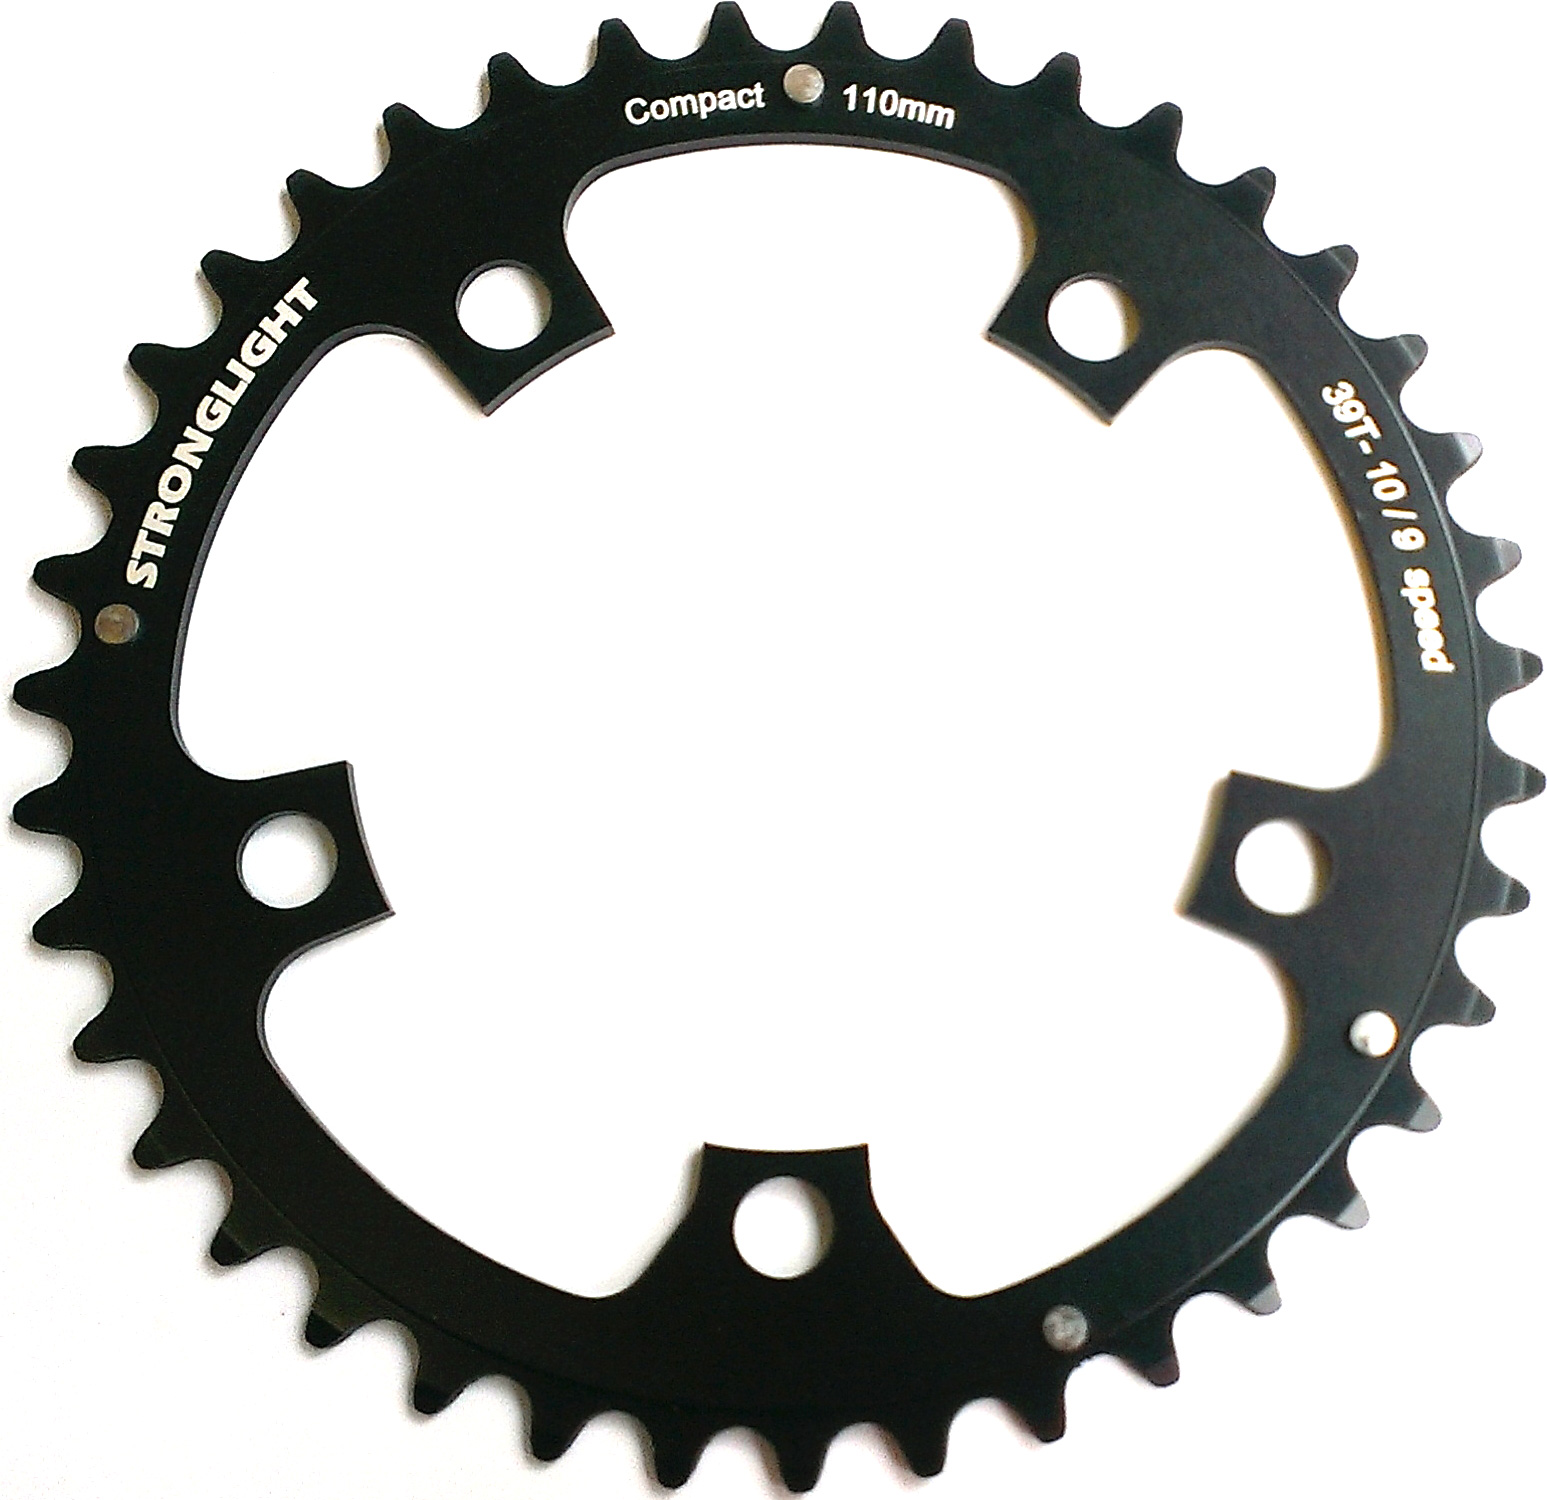 RD11038Z Stronglight 38T Black 5-Arm/110mm Chainring